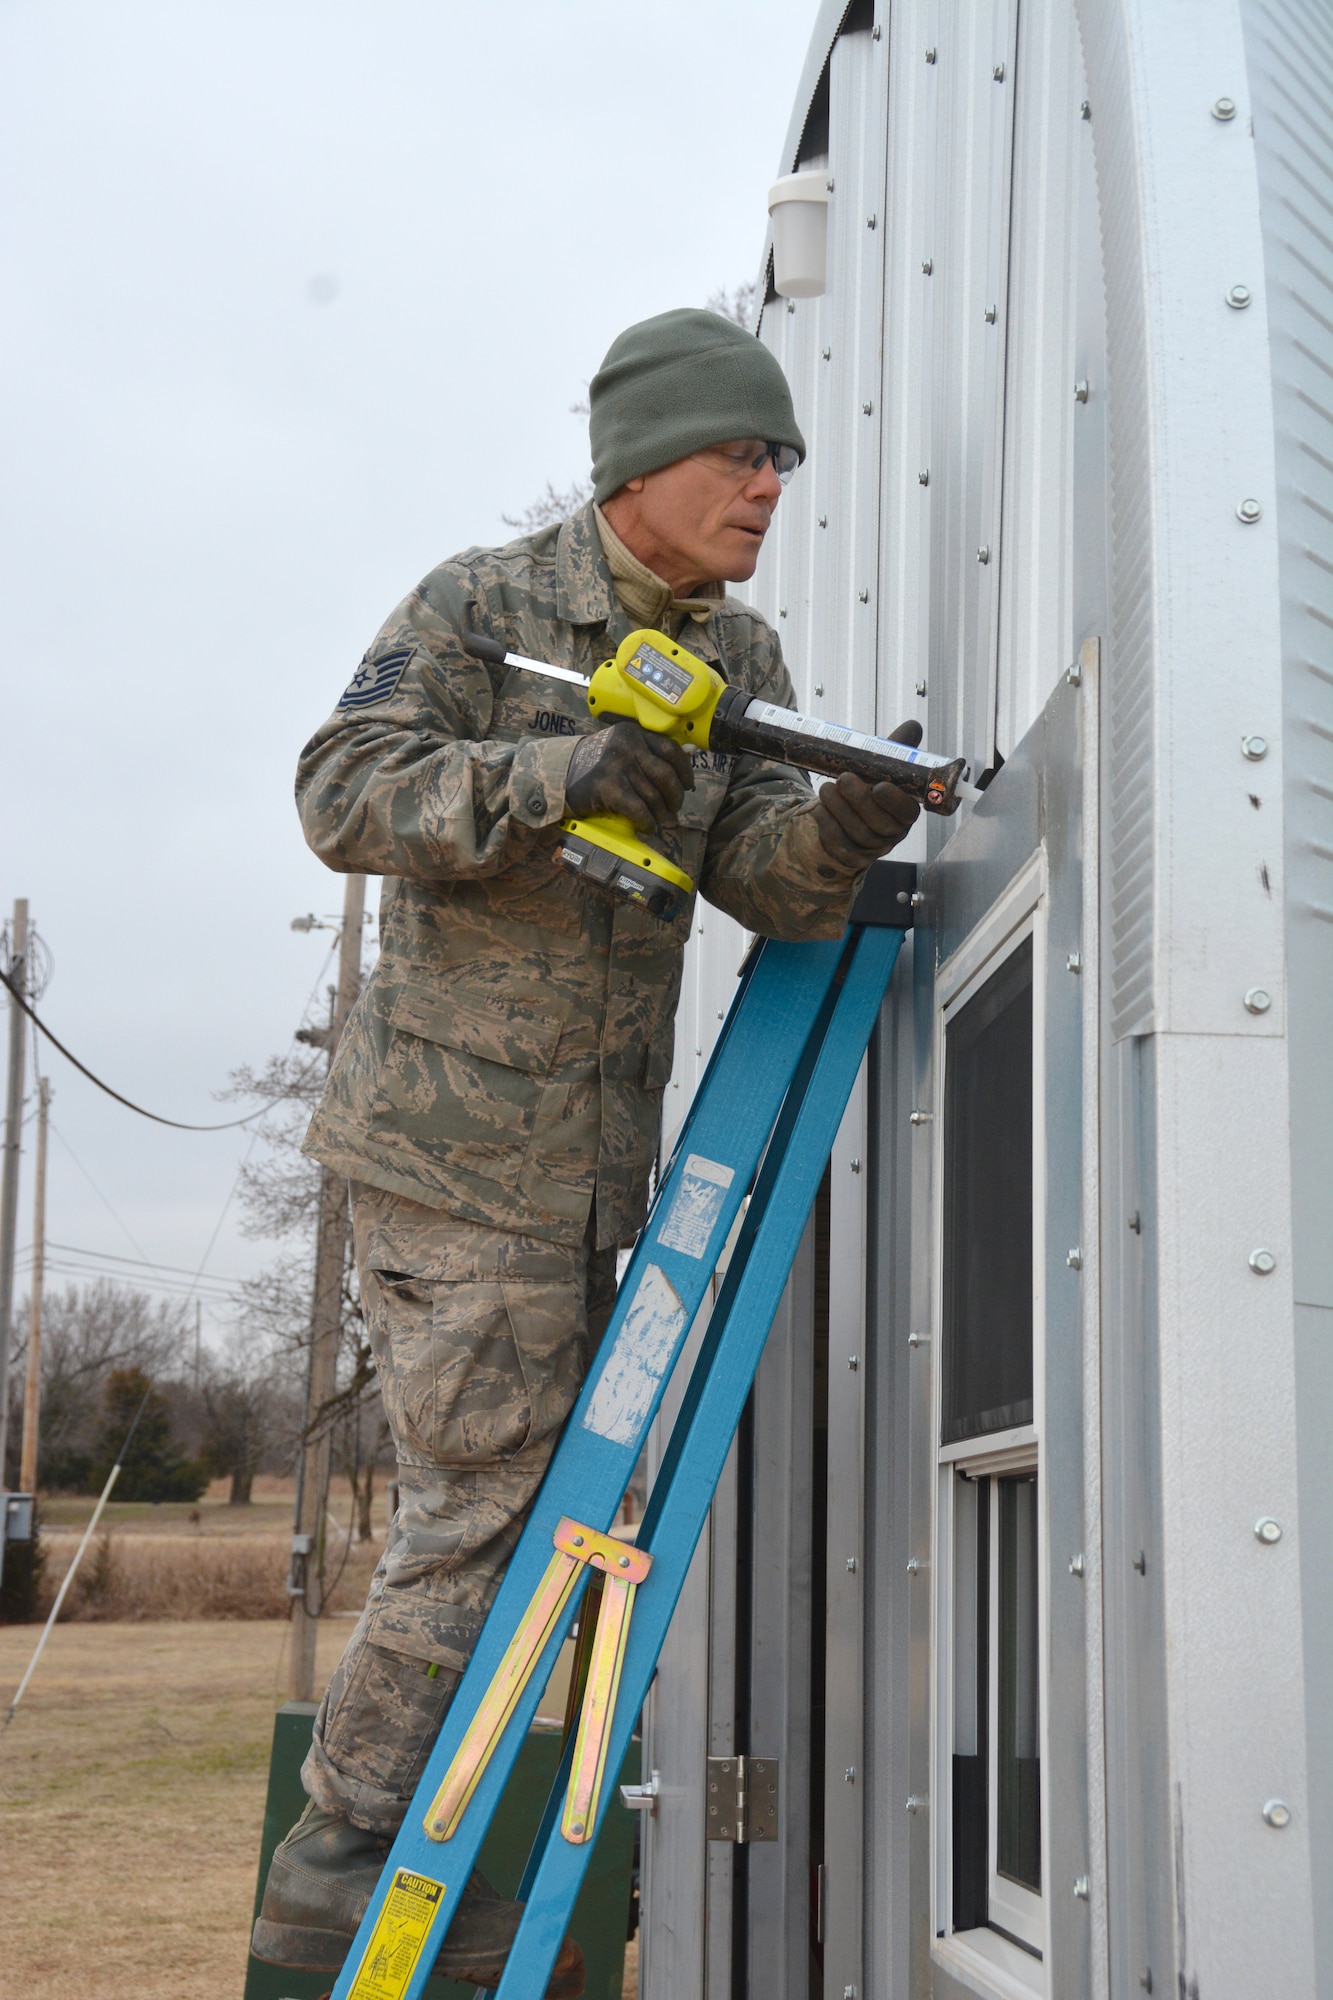 Tech. Sgt. Lyndon Jones, 507th Civil Engineer Squadron works on the final touches of one of the three new Quonset huts at the Glenwood training area here February 26. Reserve Citizen Airmen partnered with the 72nd Air Base Wing to build the huts and repair some damaged facilities at the training area. The new Quonset huts are more permanent, cheaper, and fully equipped with electric, heating and air. The improvements will make readiness training exercises on the site more efficient, according to members of the wing inspection team. (U.S. Air Force Photo by Maj. Jon Quinlan)